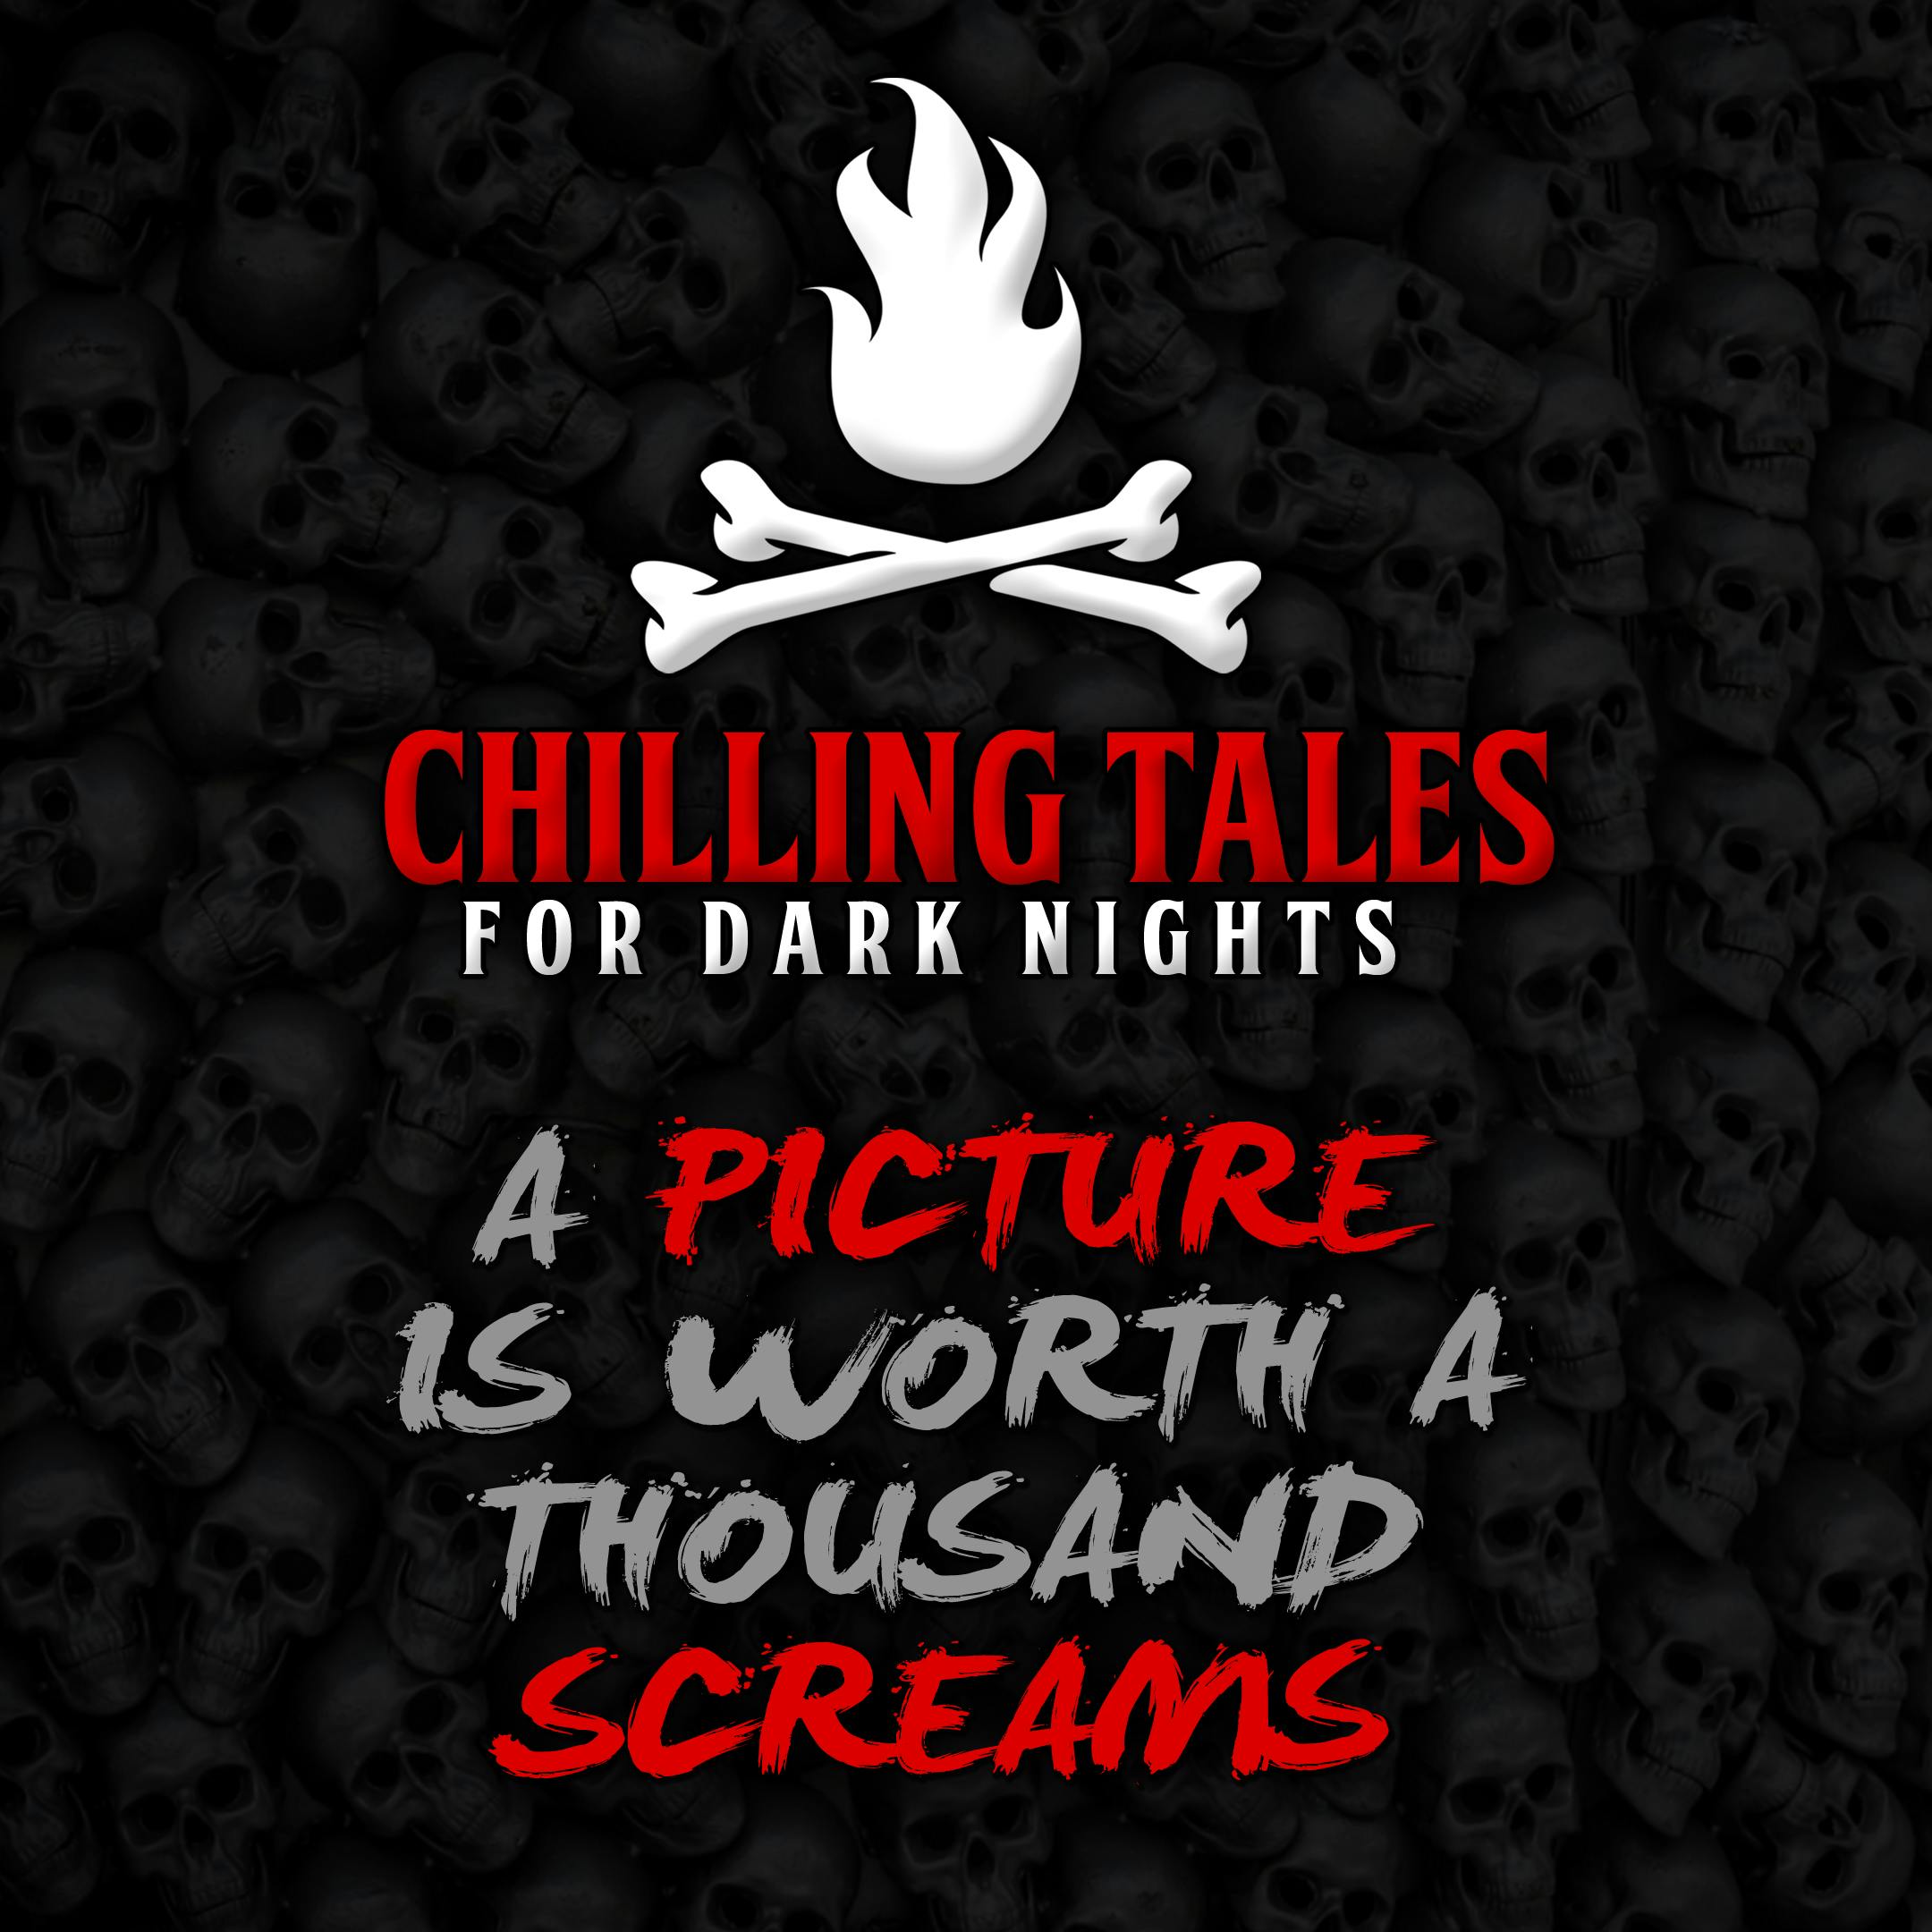 91: A Picture is Worth a Thousand Screams – Chilling Tales for Dark Nights